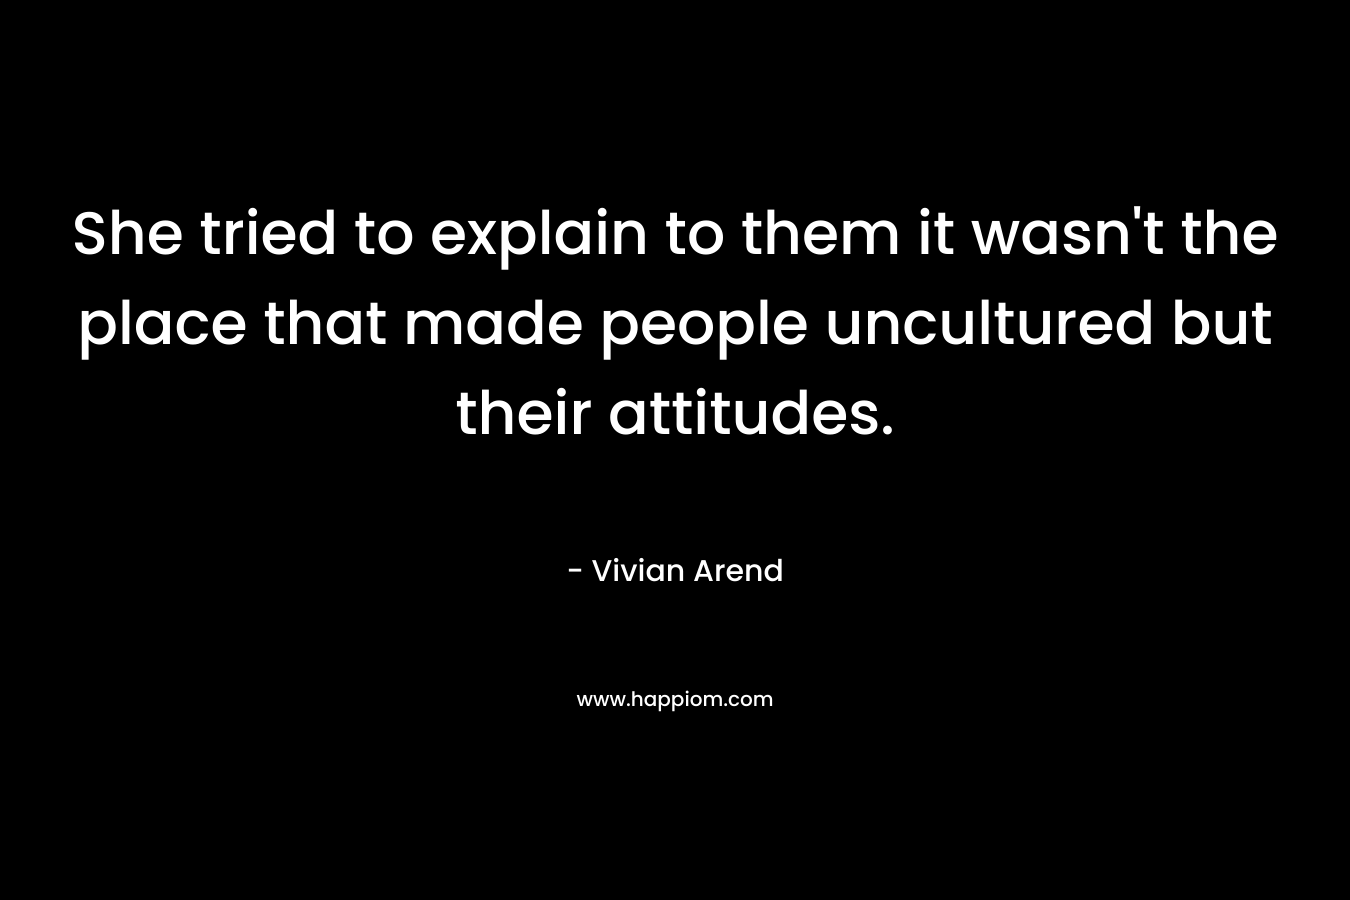 She tried to explain to them it wasn’t the place that made people uncultured but their attitudes. – Vivian Arend